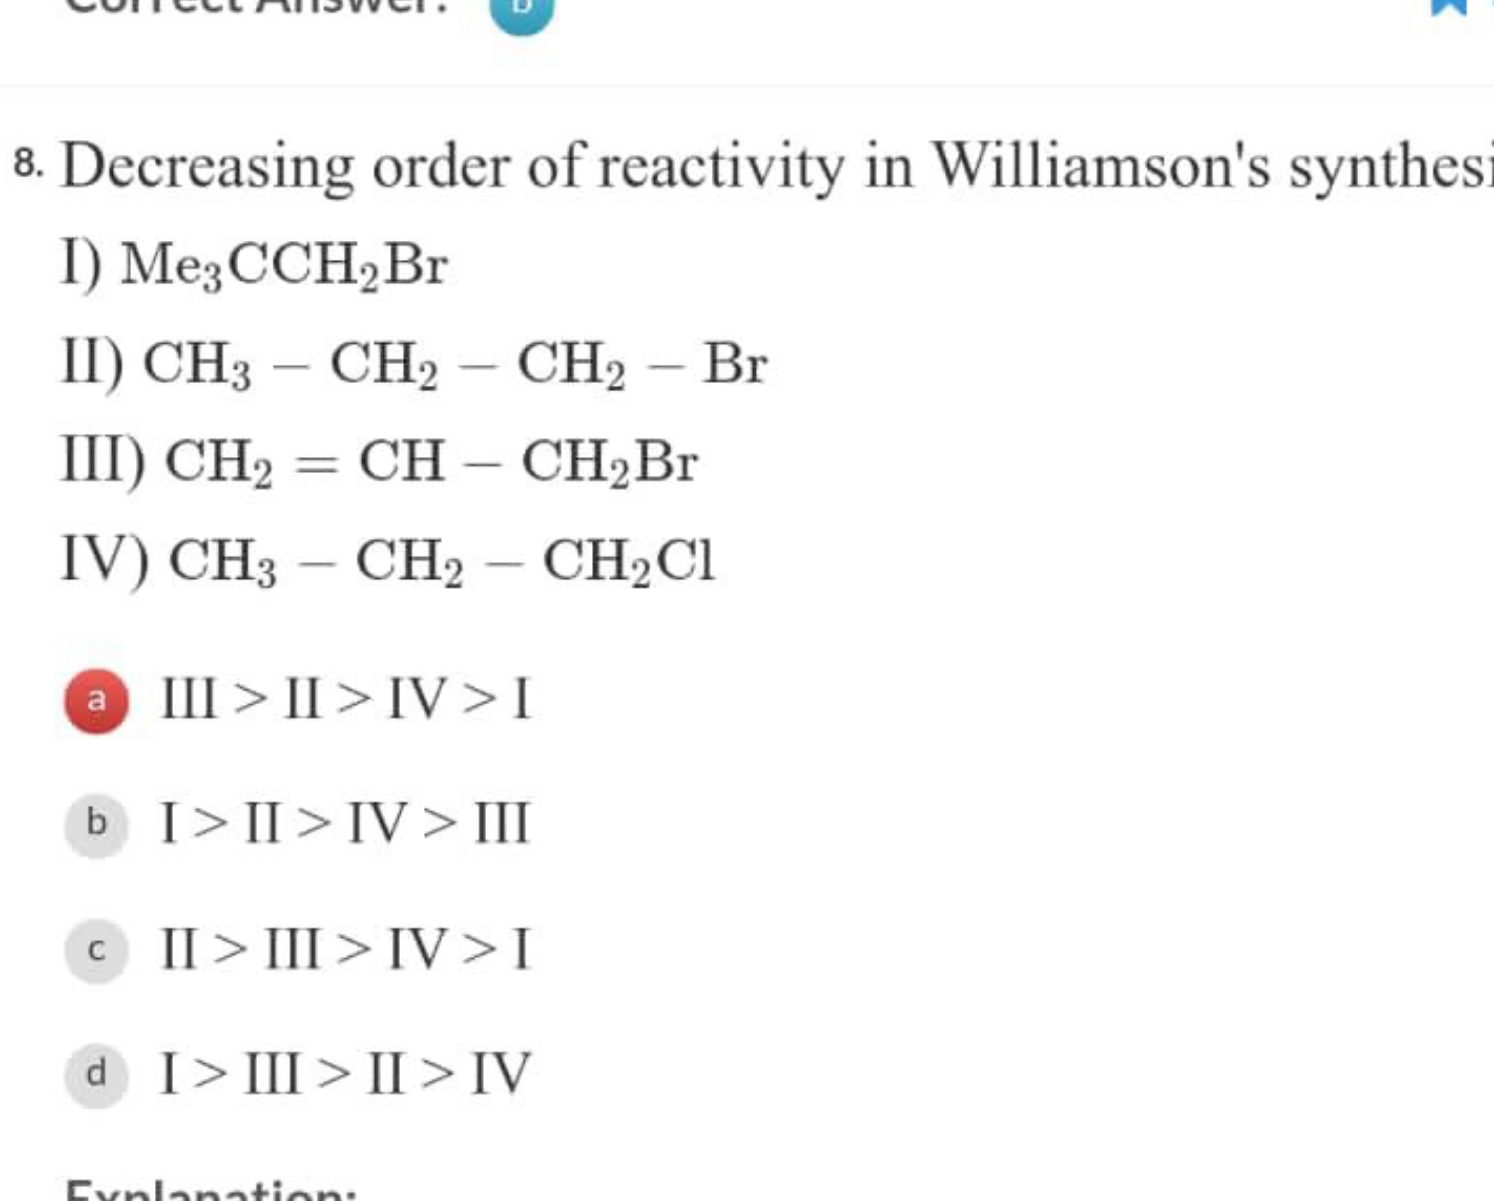 Decreasing order of reactivity in Williamson's synthes